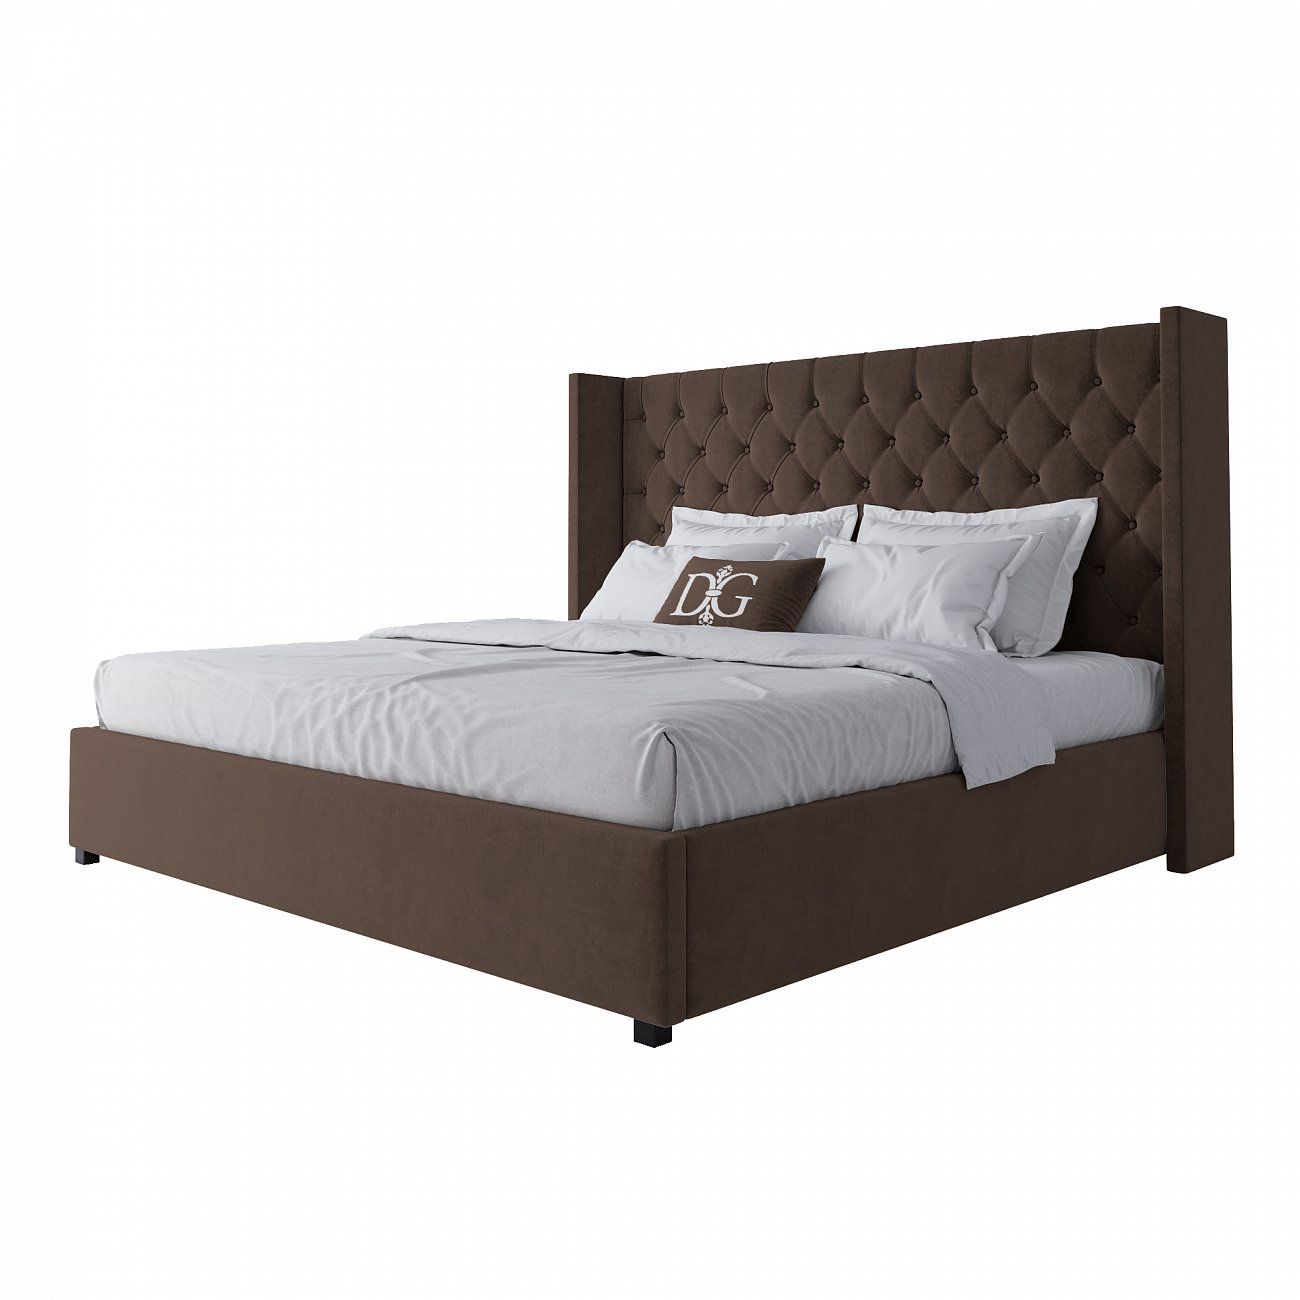 Double bed with upholstered headboard 200x200 cm brown without studs Wing-2